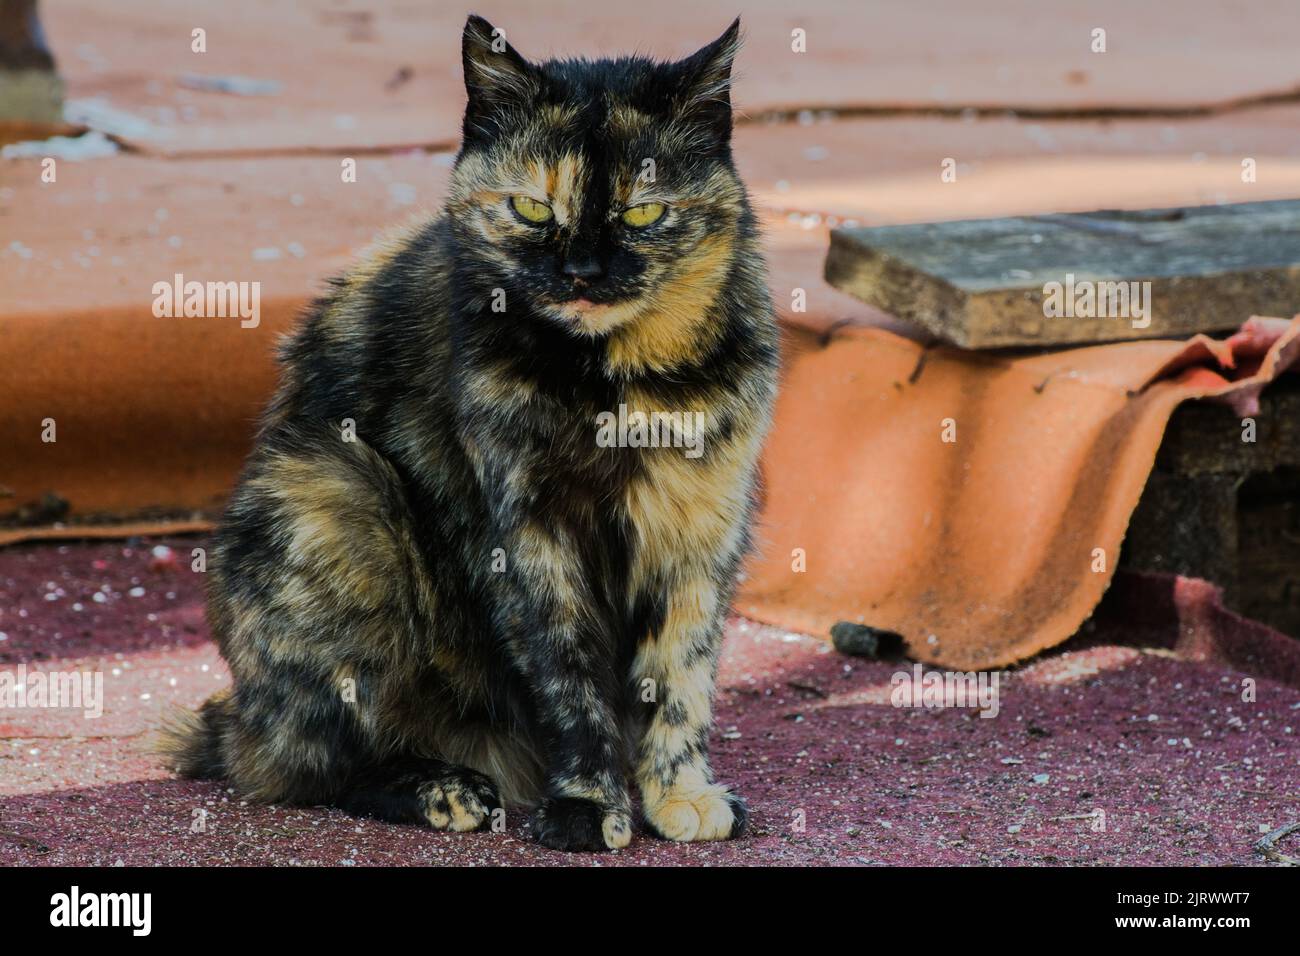 gold and black cat with tongue out and yellow eyes Stock Photo